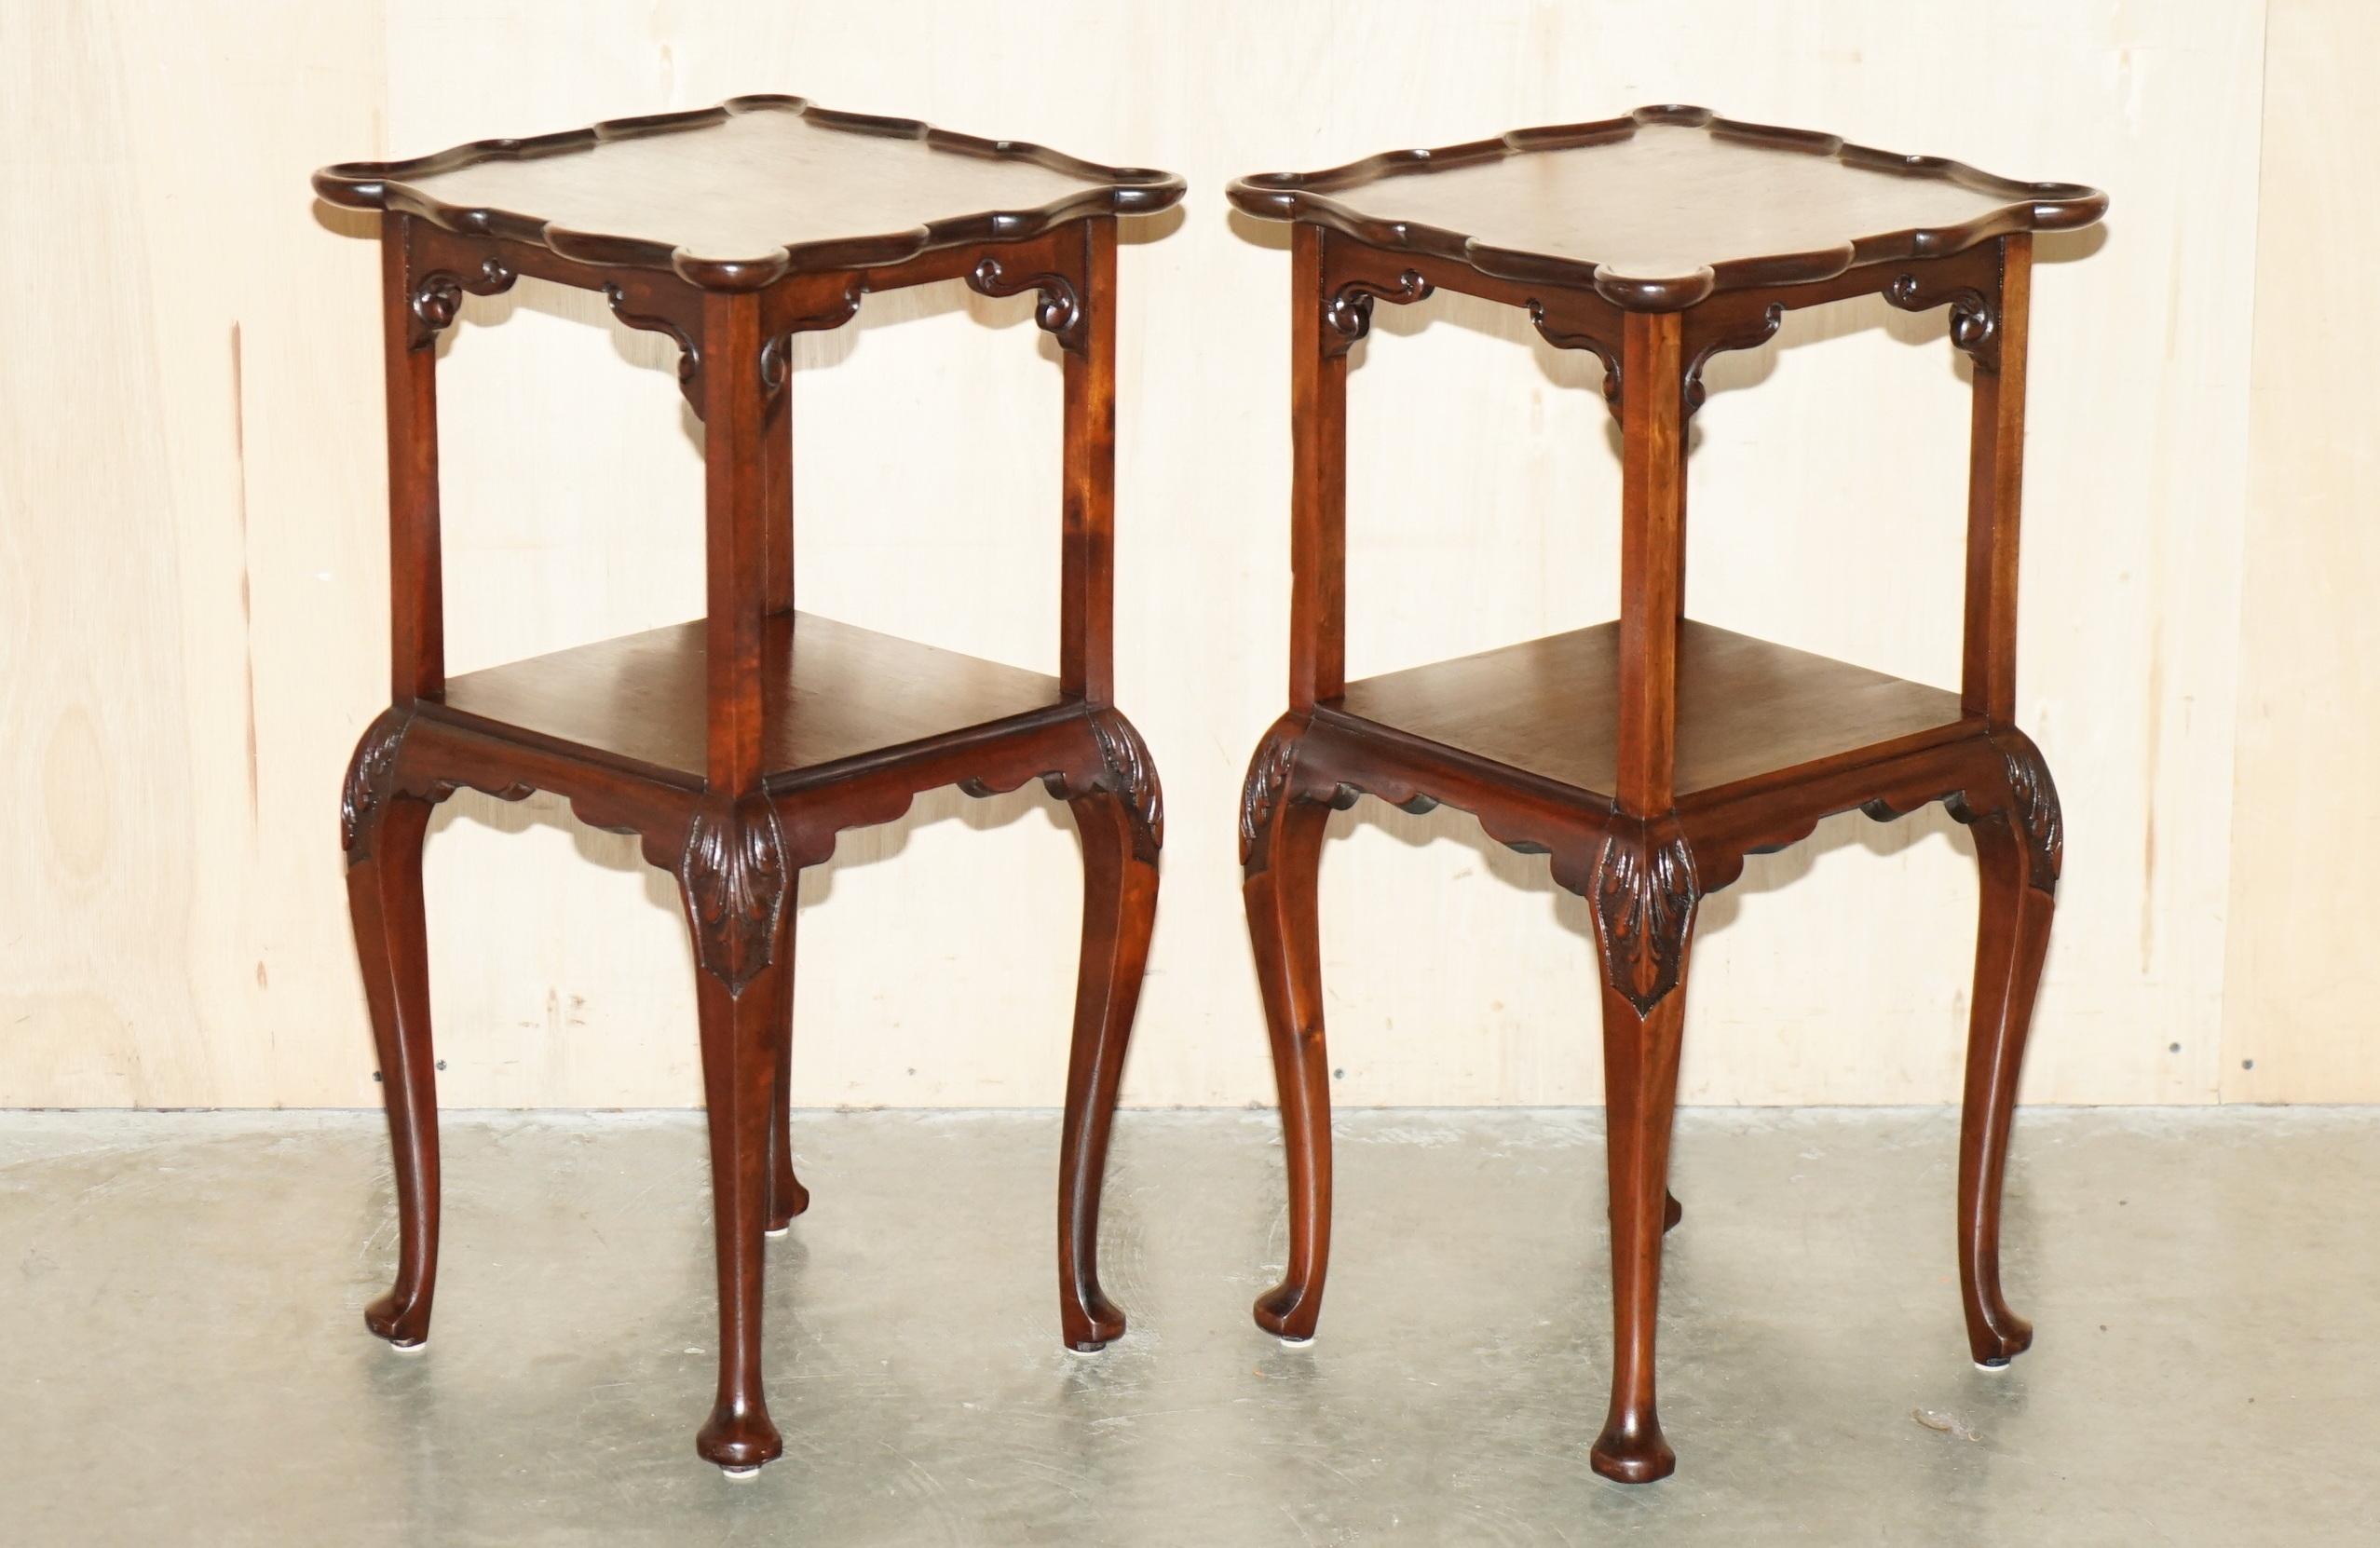 Royal House Antiques

Royal House Antiques is delighted to offer for sale this lovely pair of vintage Thomas Chippendale style two tier tall side tables with lovely sculpted Pie Crust edge top, signed by the restorer to the base

Please note the